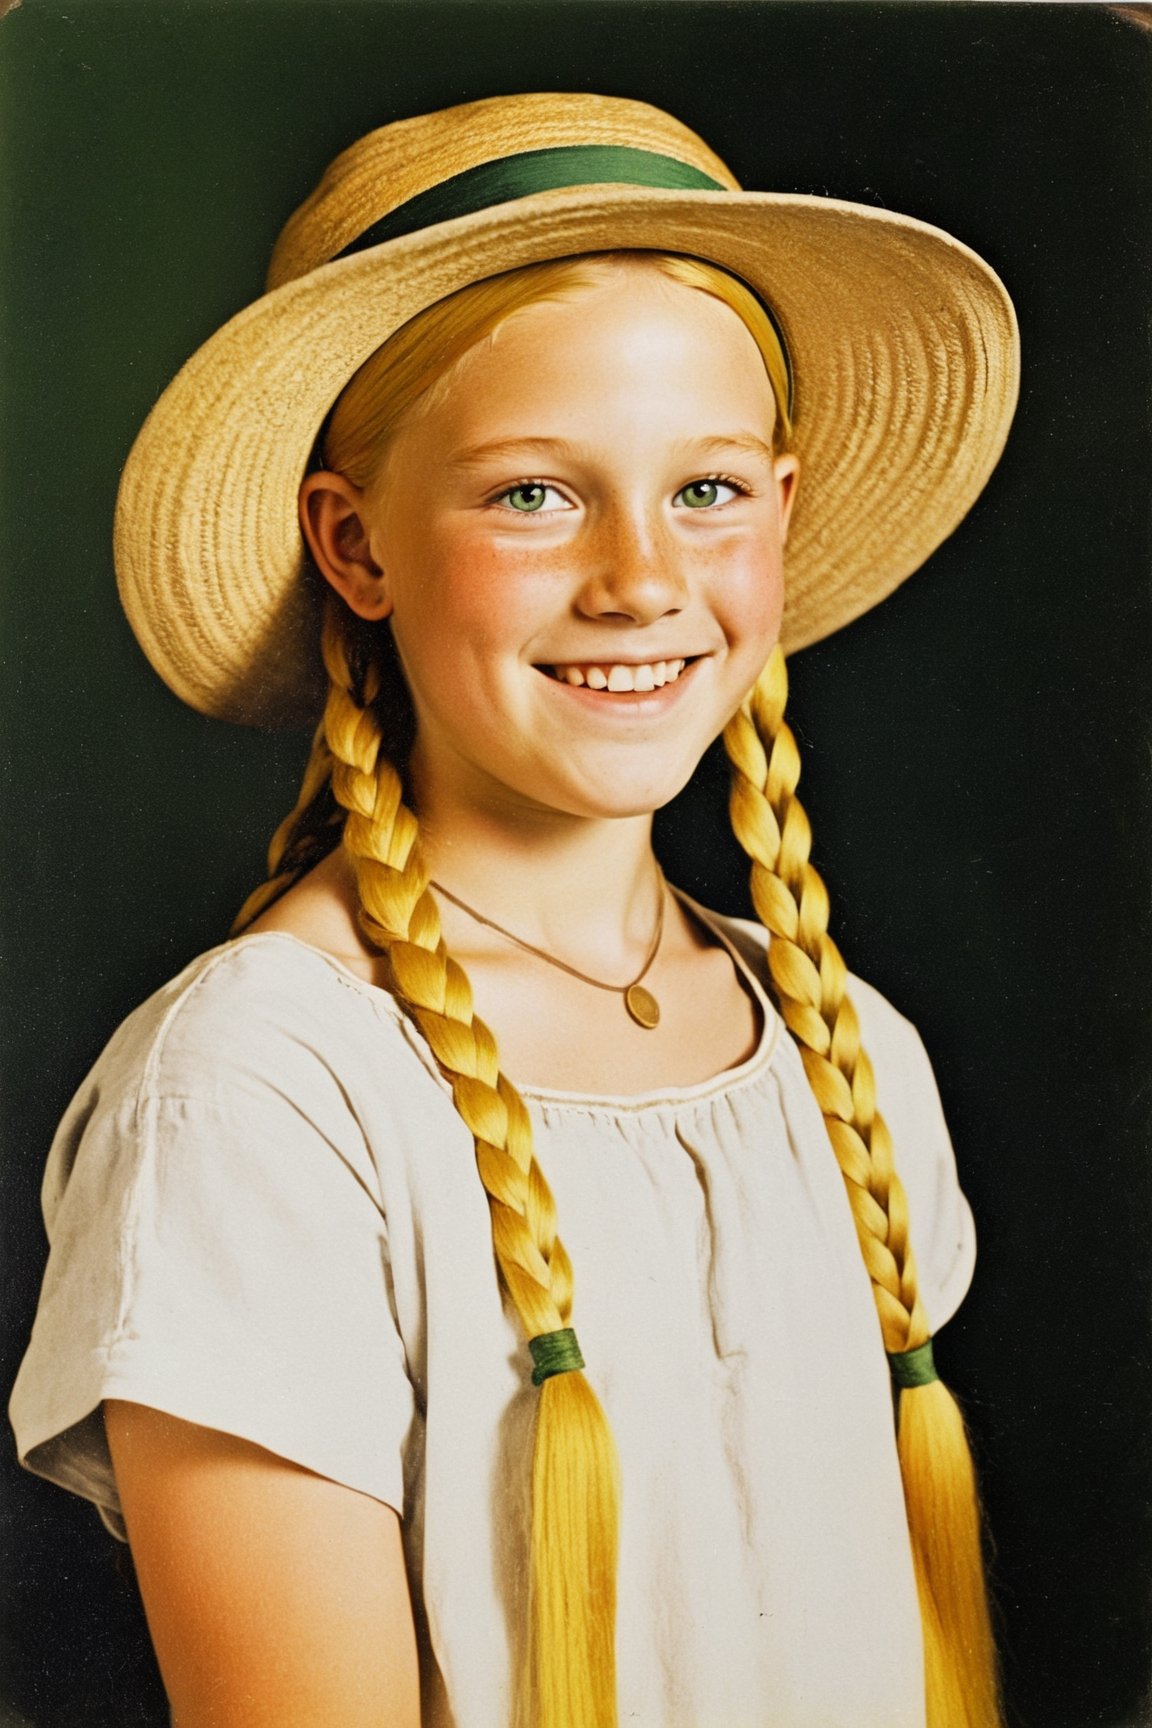 artist Indiana Johns, young girl, 14 year old, solo, completely naked, archaeologist, yellow hair, long braids, open forehead, panama hat, green eyes,  scorching sun, sweet smile, rarity, antiques, archeology, antiquity, archaeological excavation, divine, radiance, official art, stile Indiana Johns
